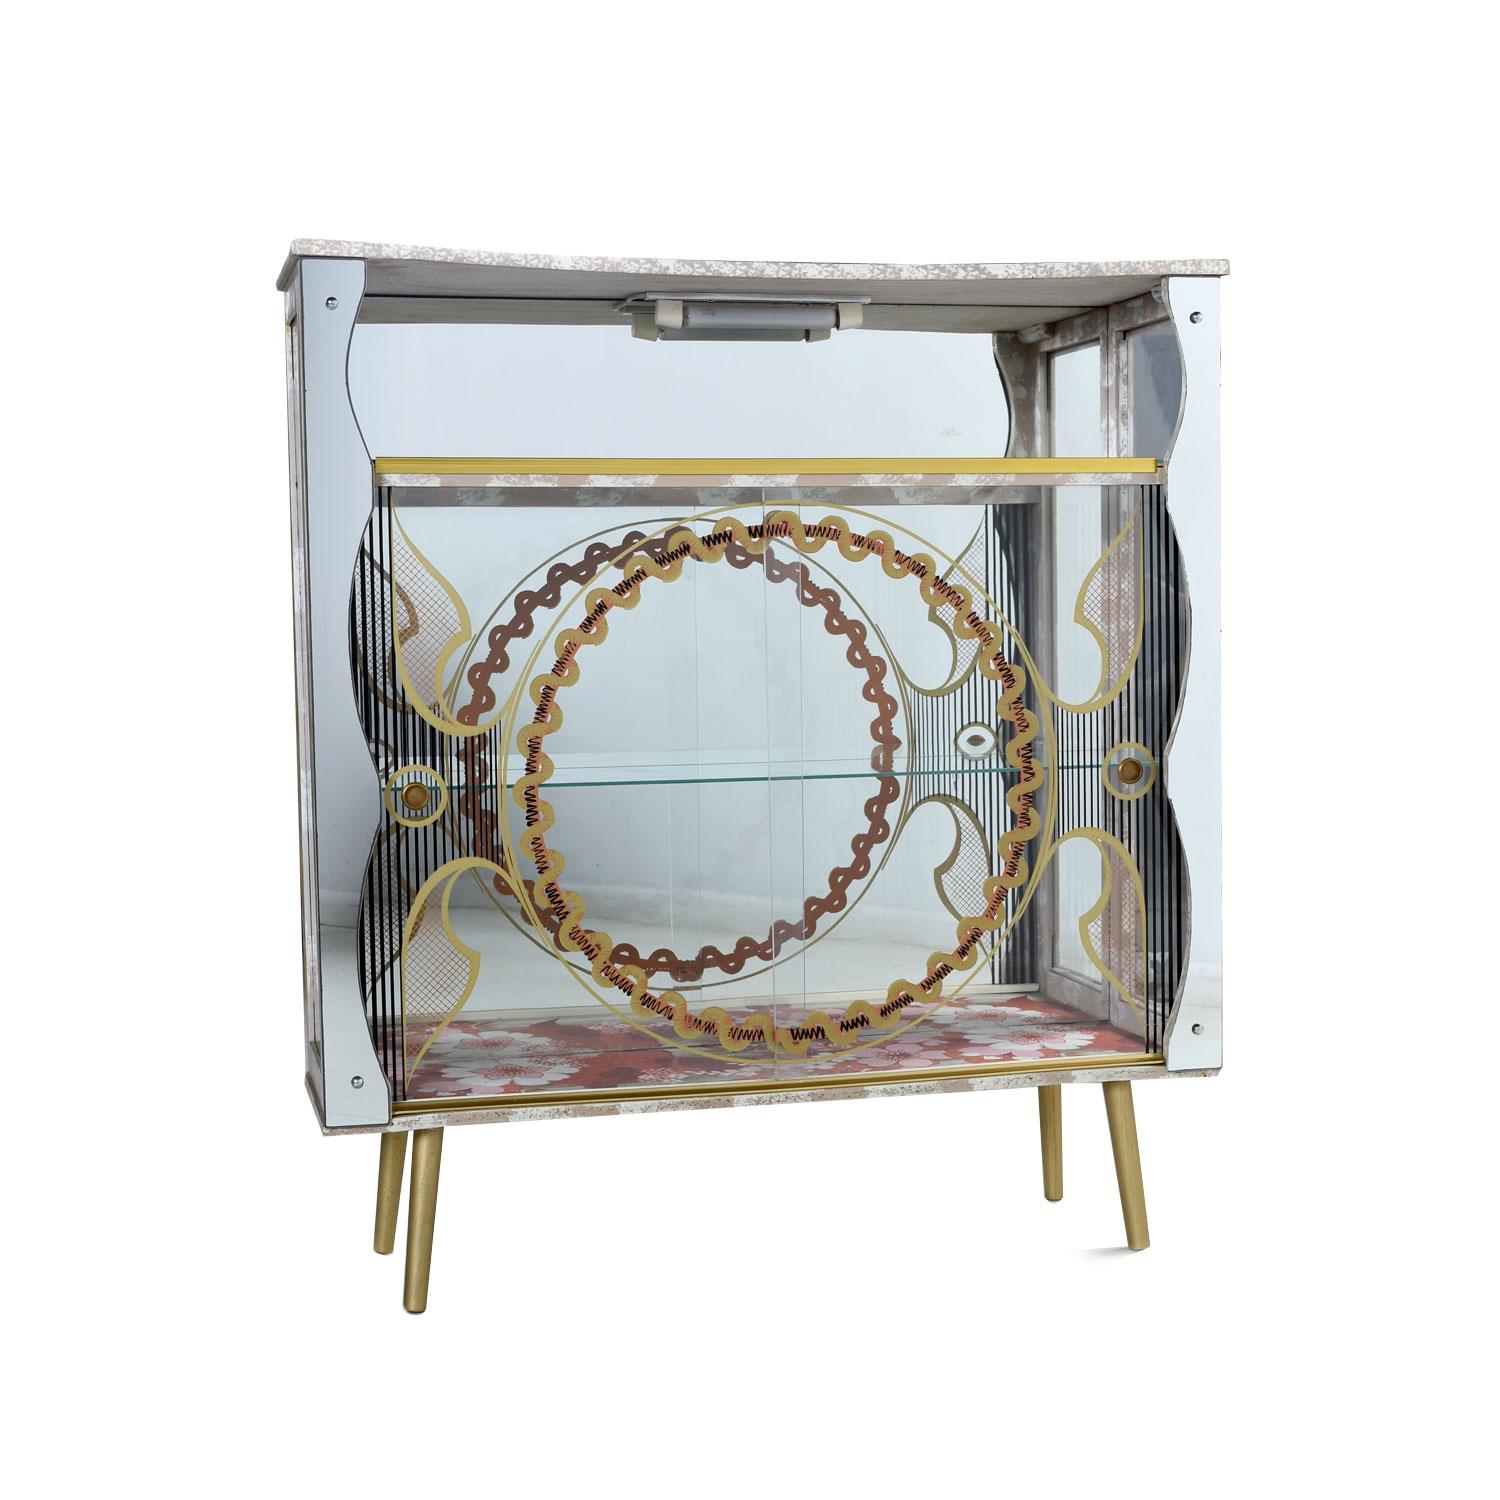 Rockabilly meets Art Deco with this funky, vintage 1950s, curio cabinet. This petite display case packs a bunch of personality into a small package. The built-in overhead lamp will dramatically illuminate your treasured collection. This china